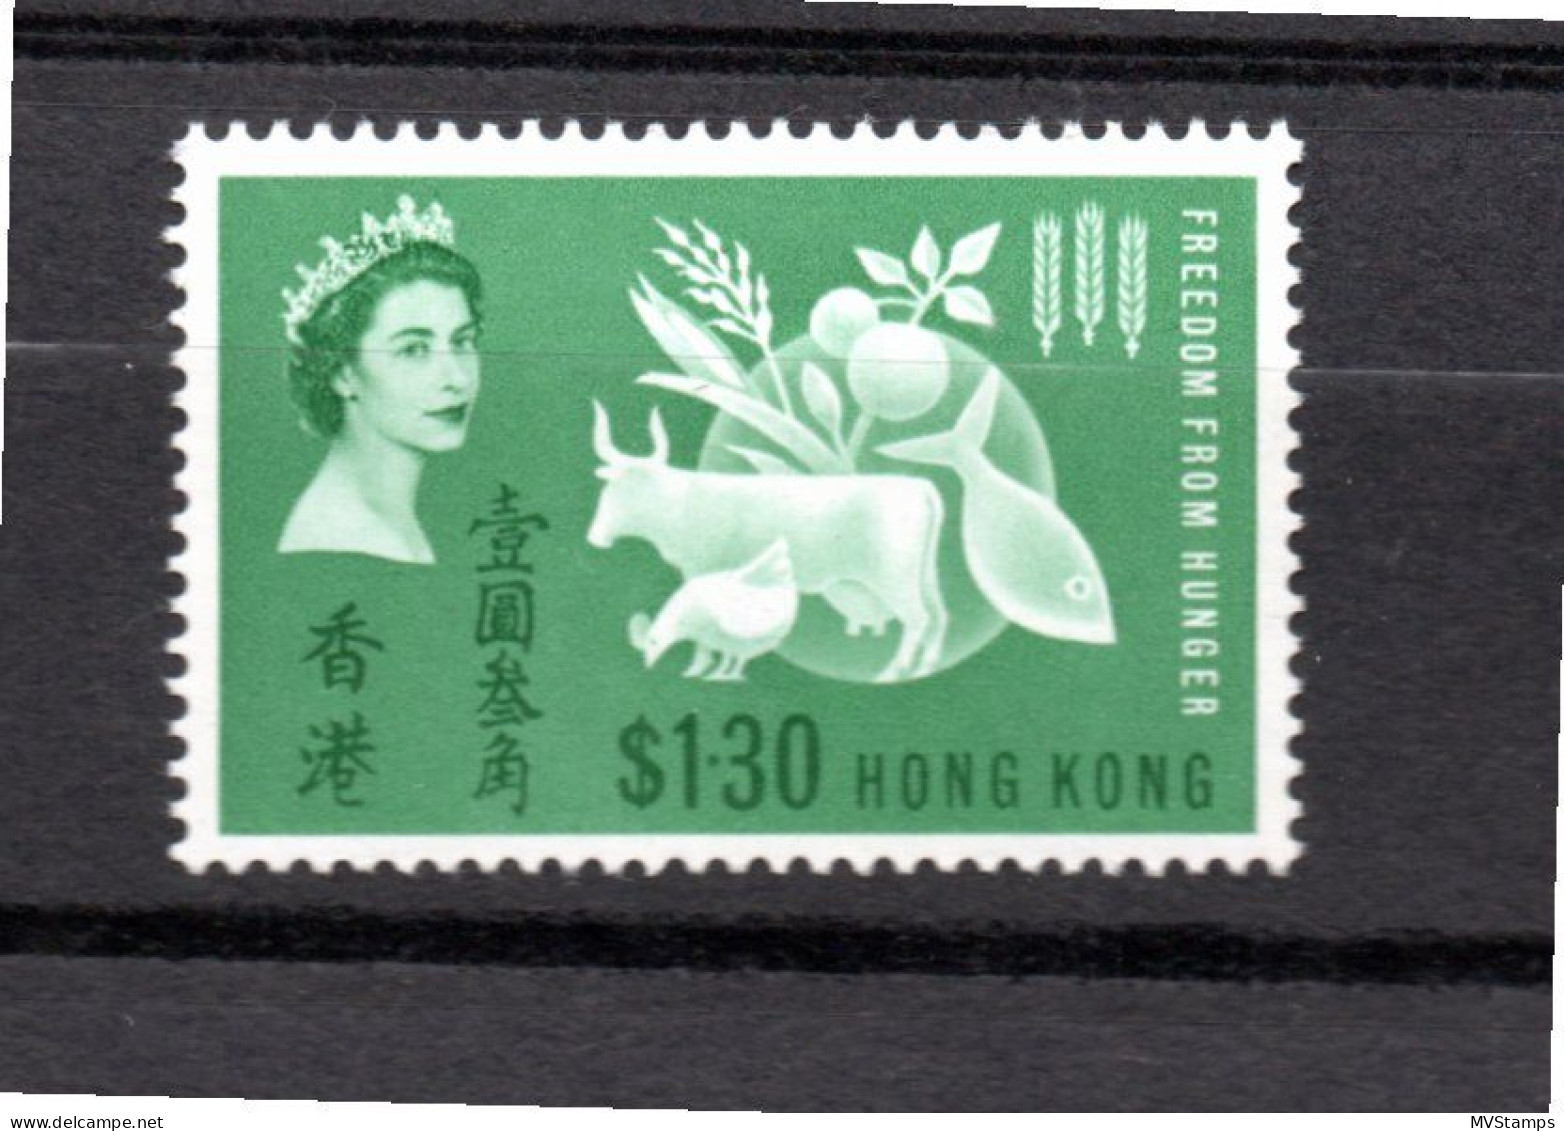 Hong Kong 1963 Hunger/Cow $1.30 Stamp (Michel 211) MNH - Unused Stamps